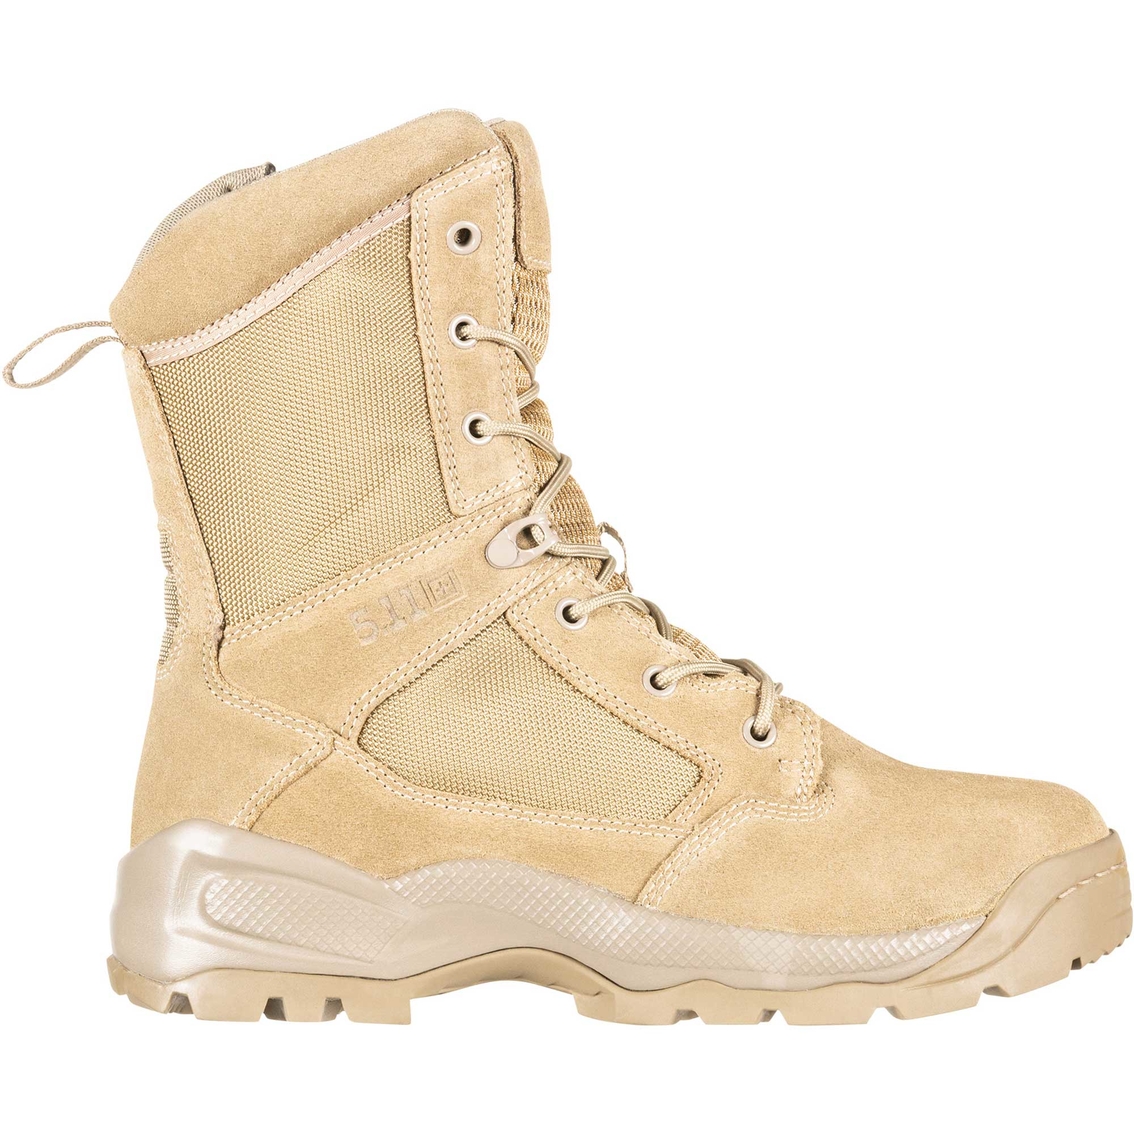 5.11 Men's A.T.A.C. 2.0 8 in. Arid Coyote Boots - Image 2 of 6